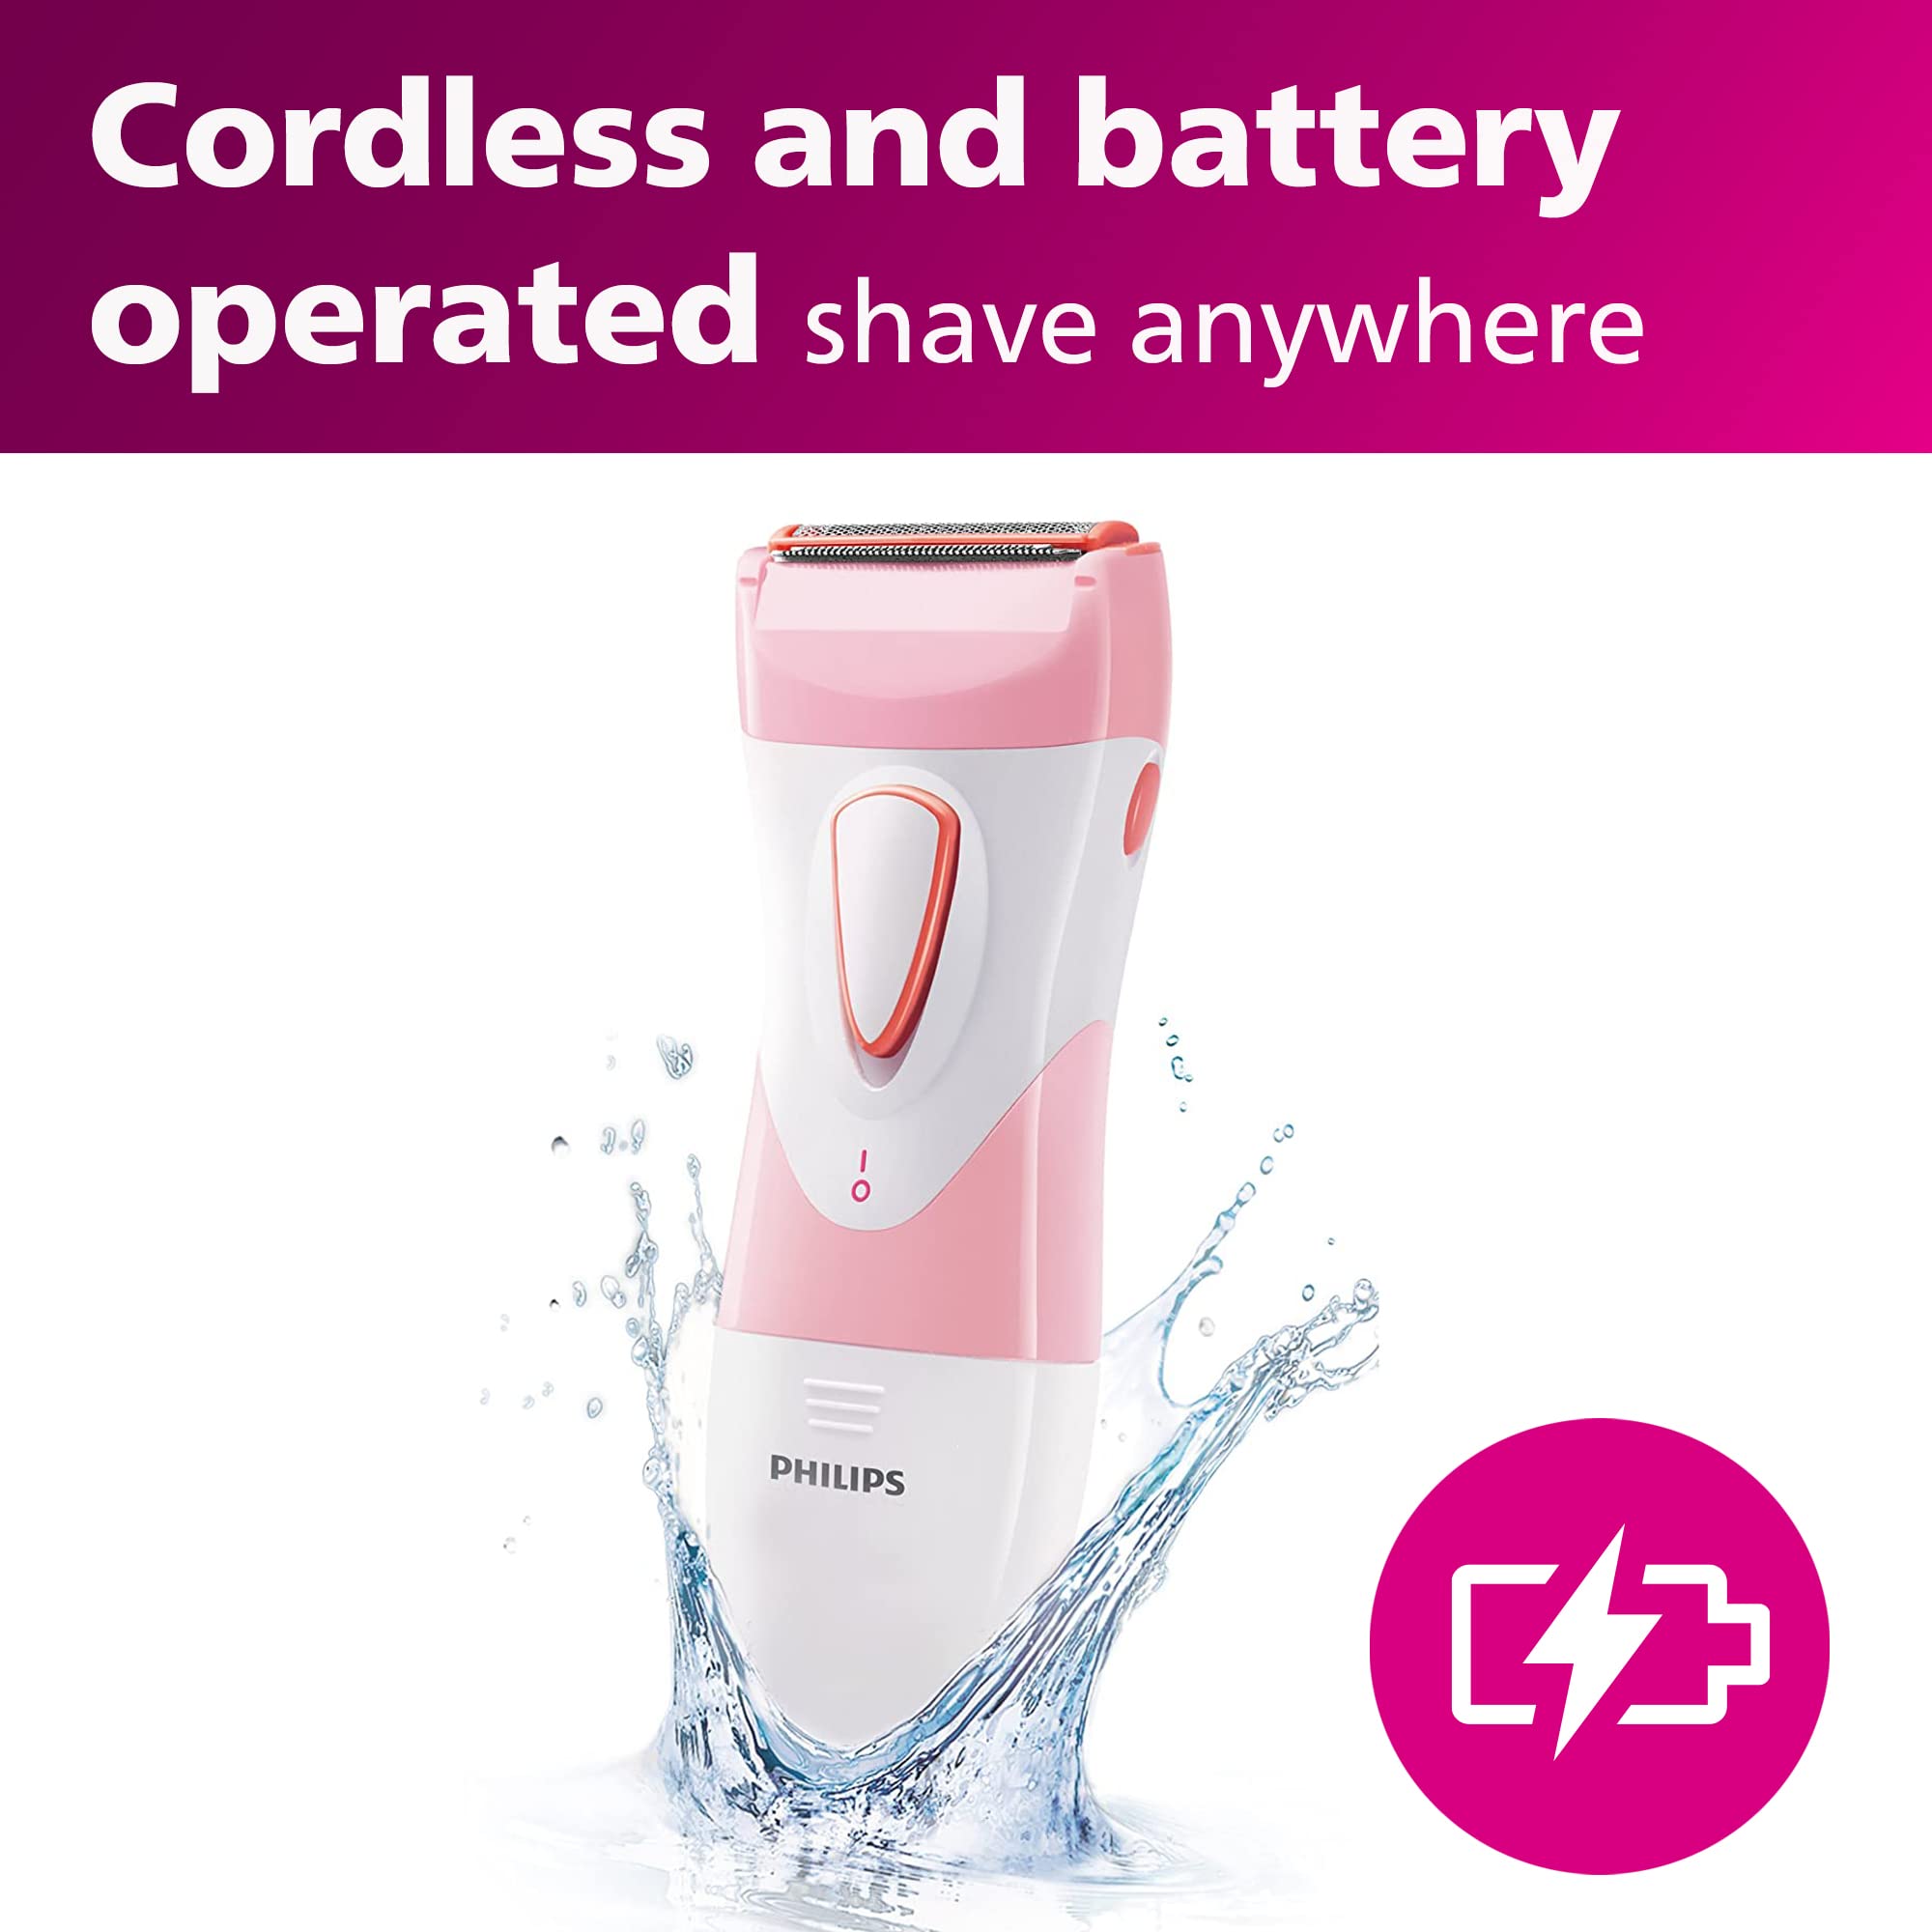 Philips Beauty SatinShave Essential Women's Wet & Dry Electric Shaver for Legs, Cordless, Pink and White, HP6306/50